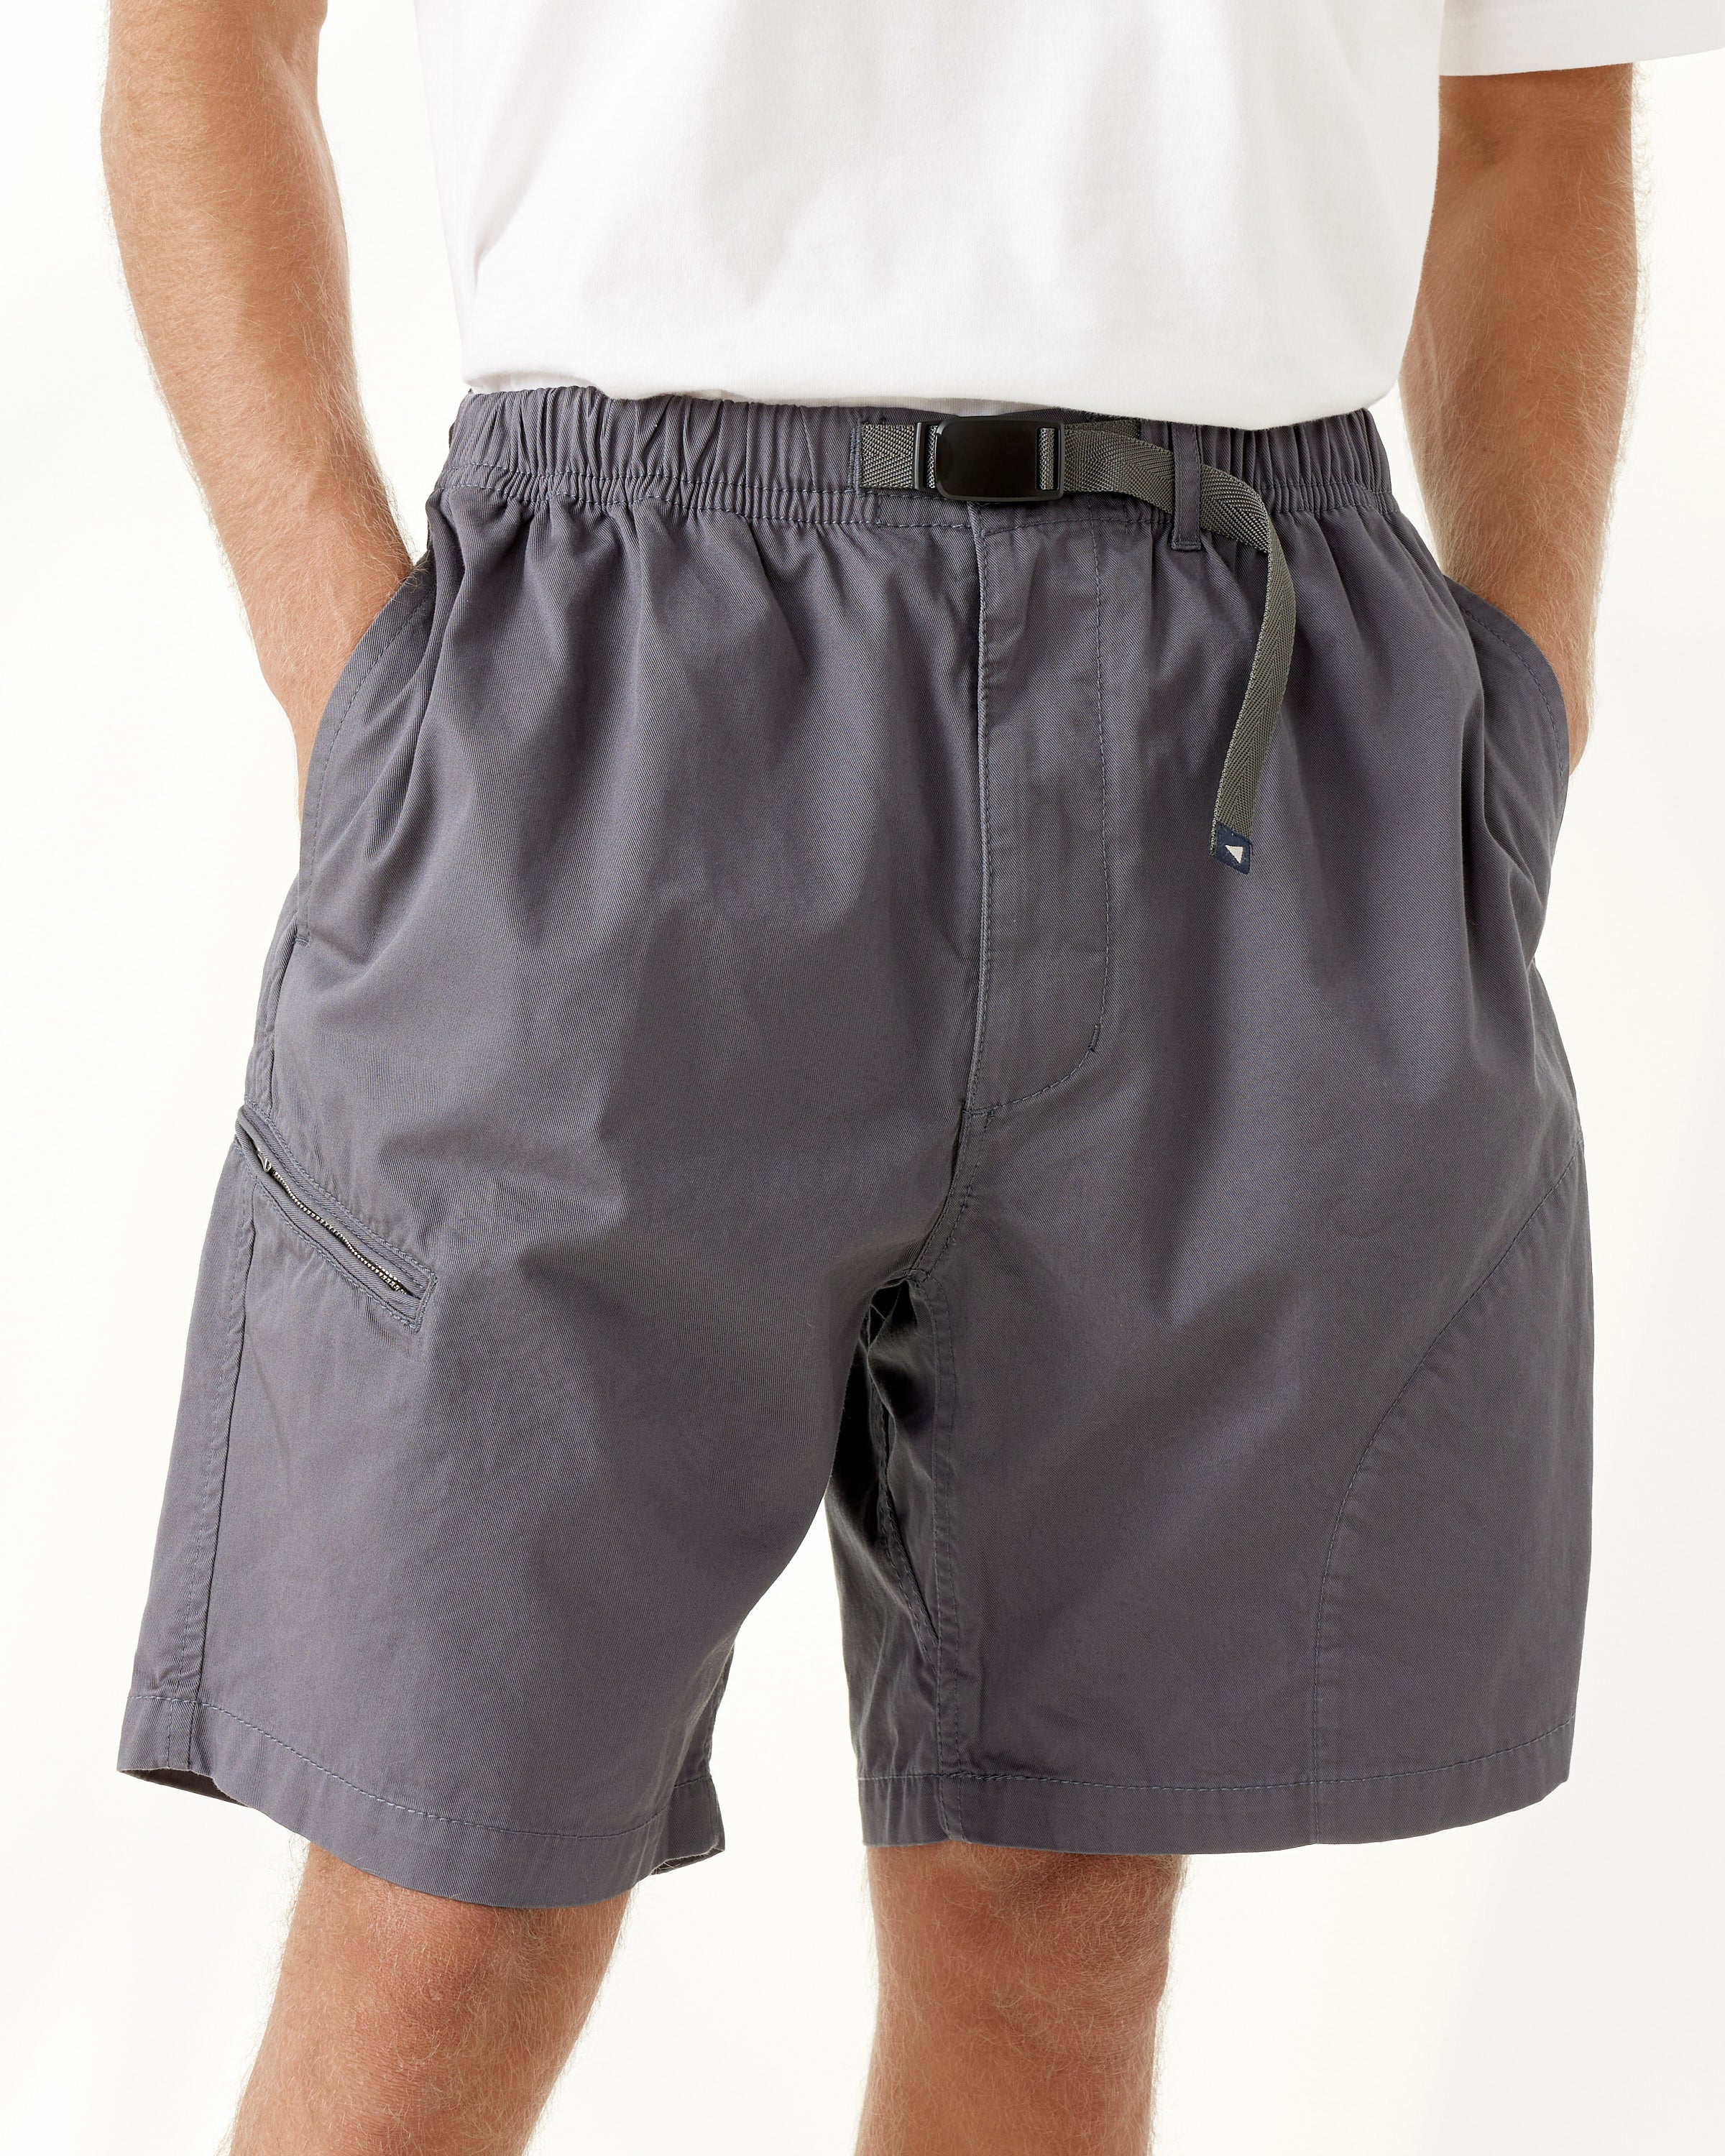 Salathe Twill Climbing Short in Charcoal in Sage